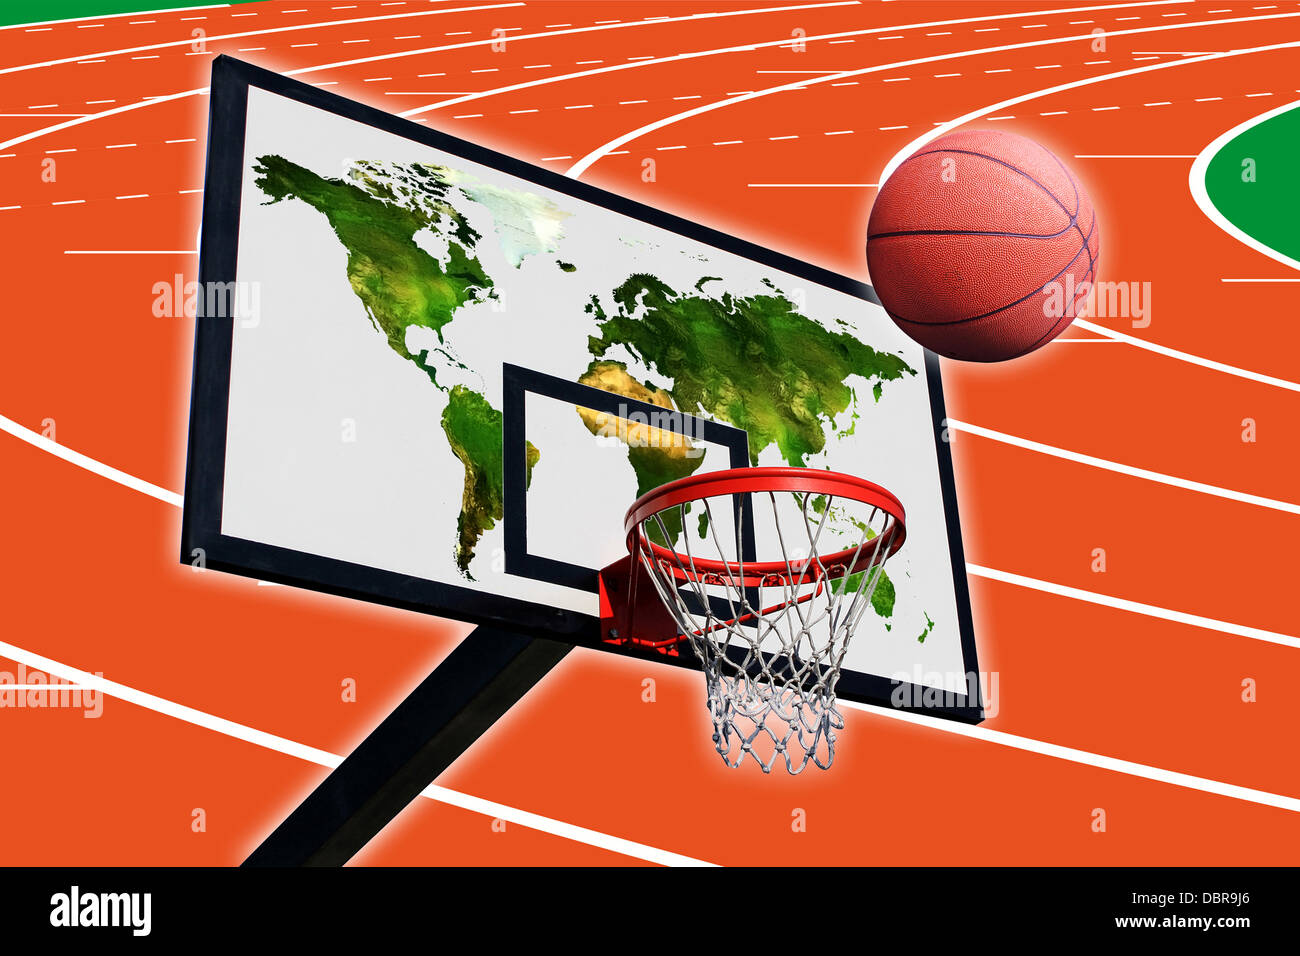 a basketball and a panel of basketball with a world map on a background of running track Stock Photo